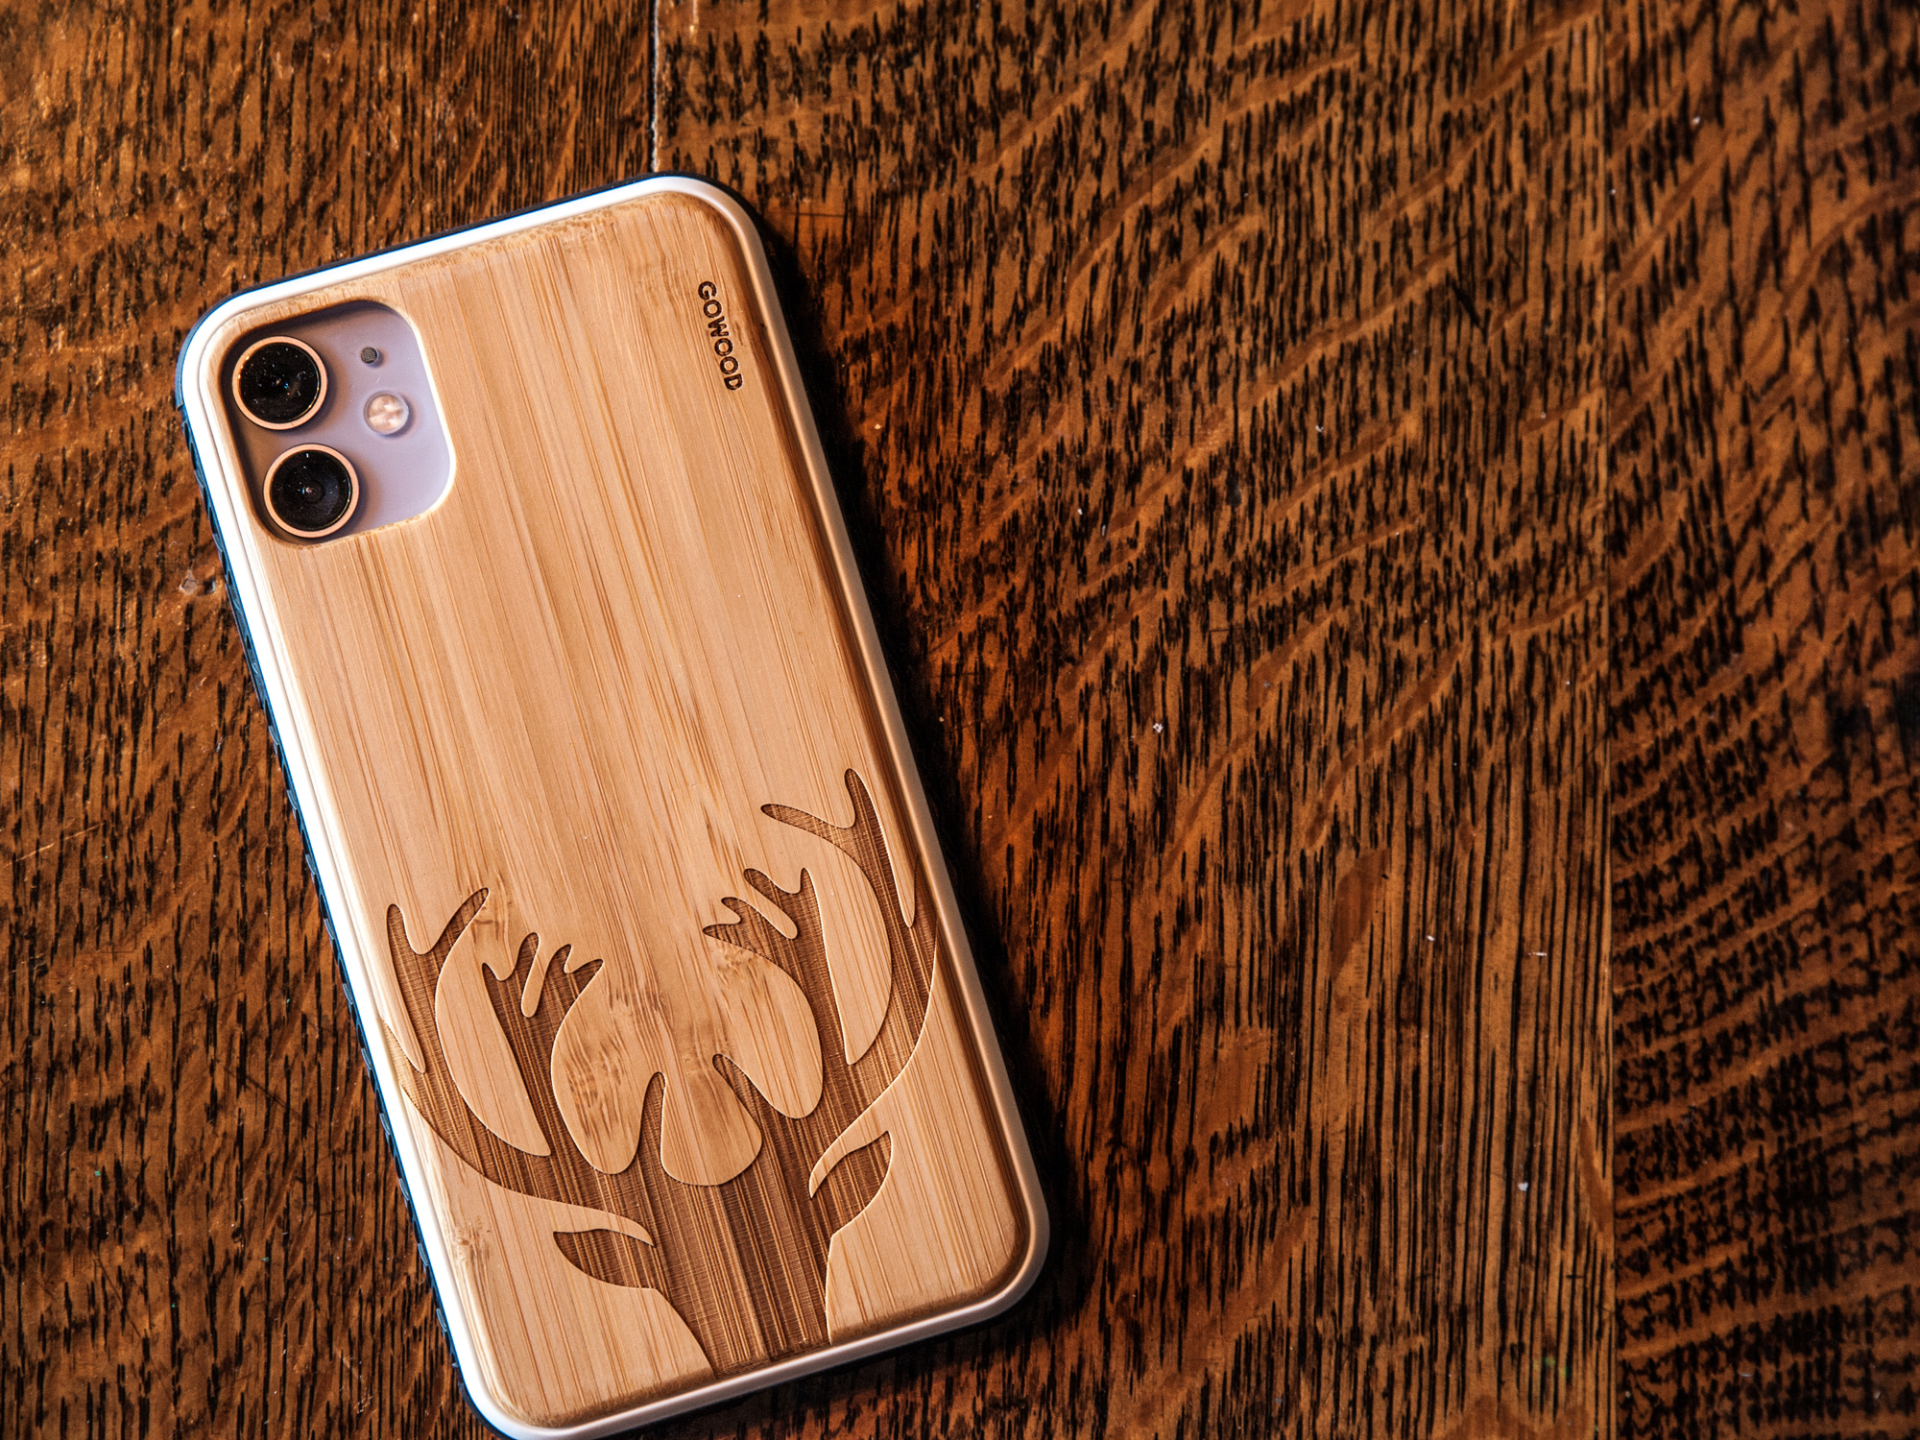 iPhone 11 Pro wood case deer engraved bamboo backside with TPU bumper